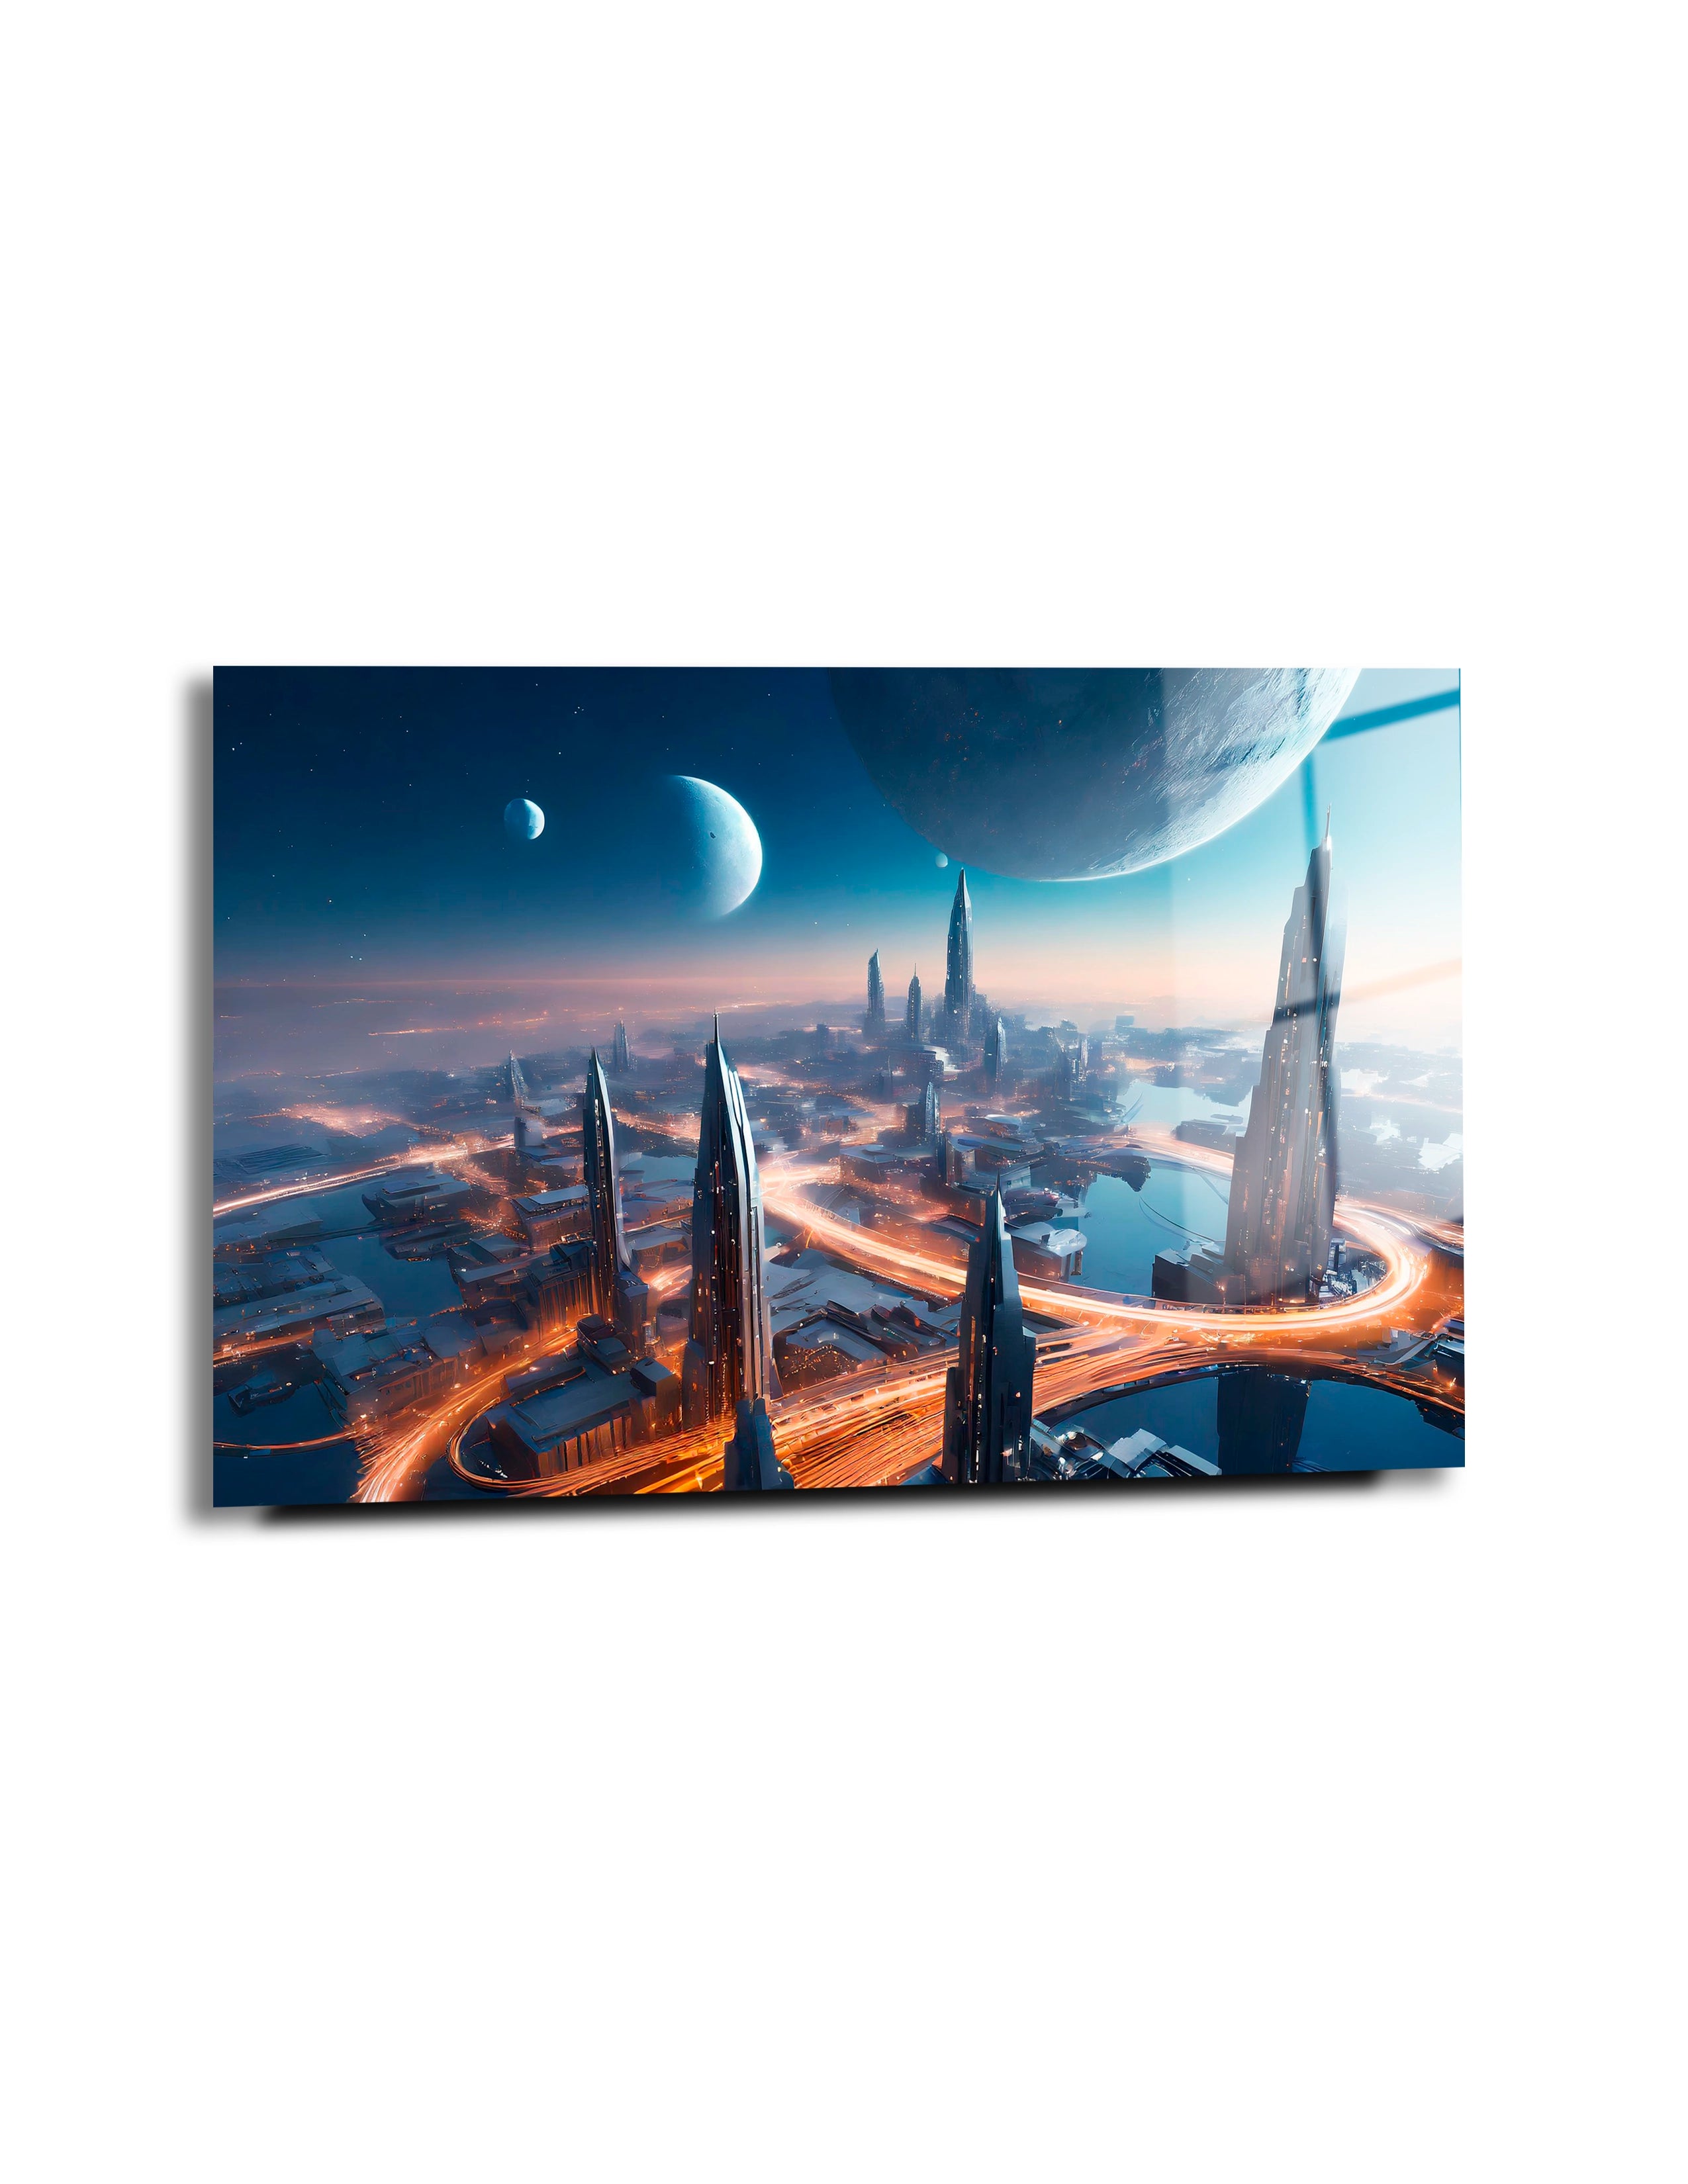 Futuristic City in The Sky With Moons